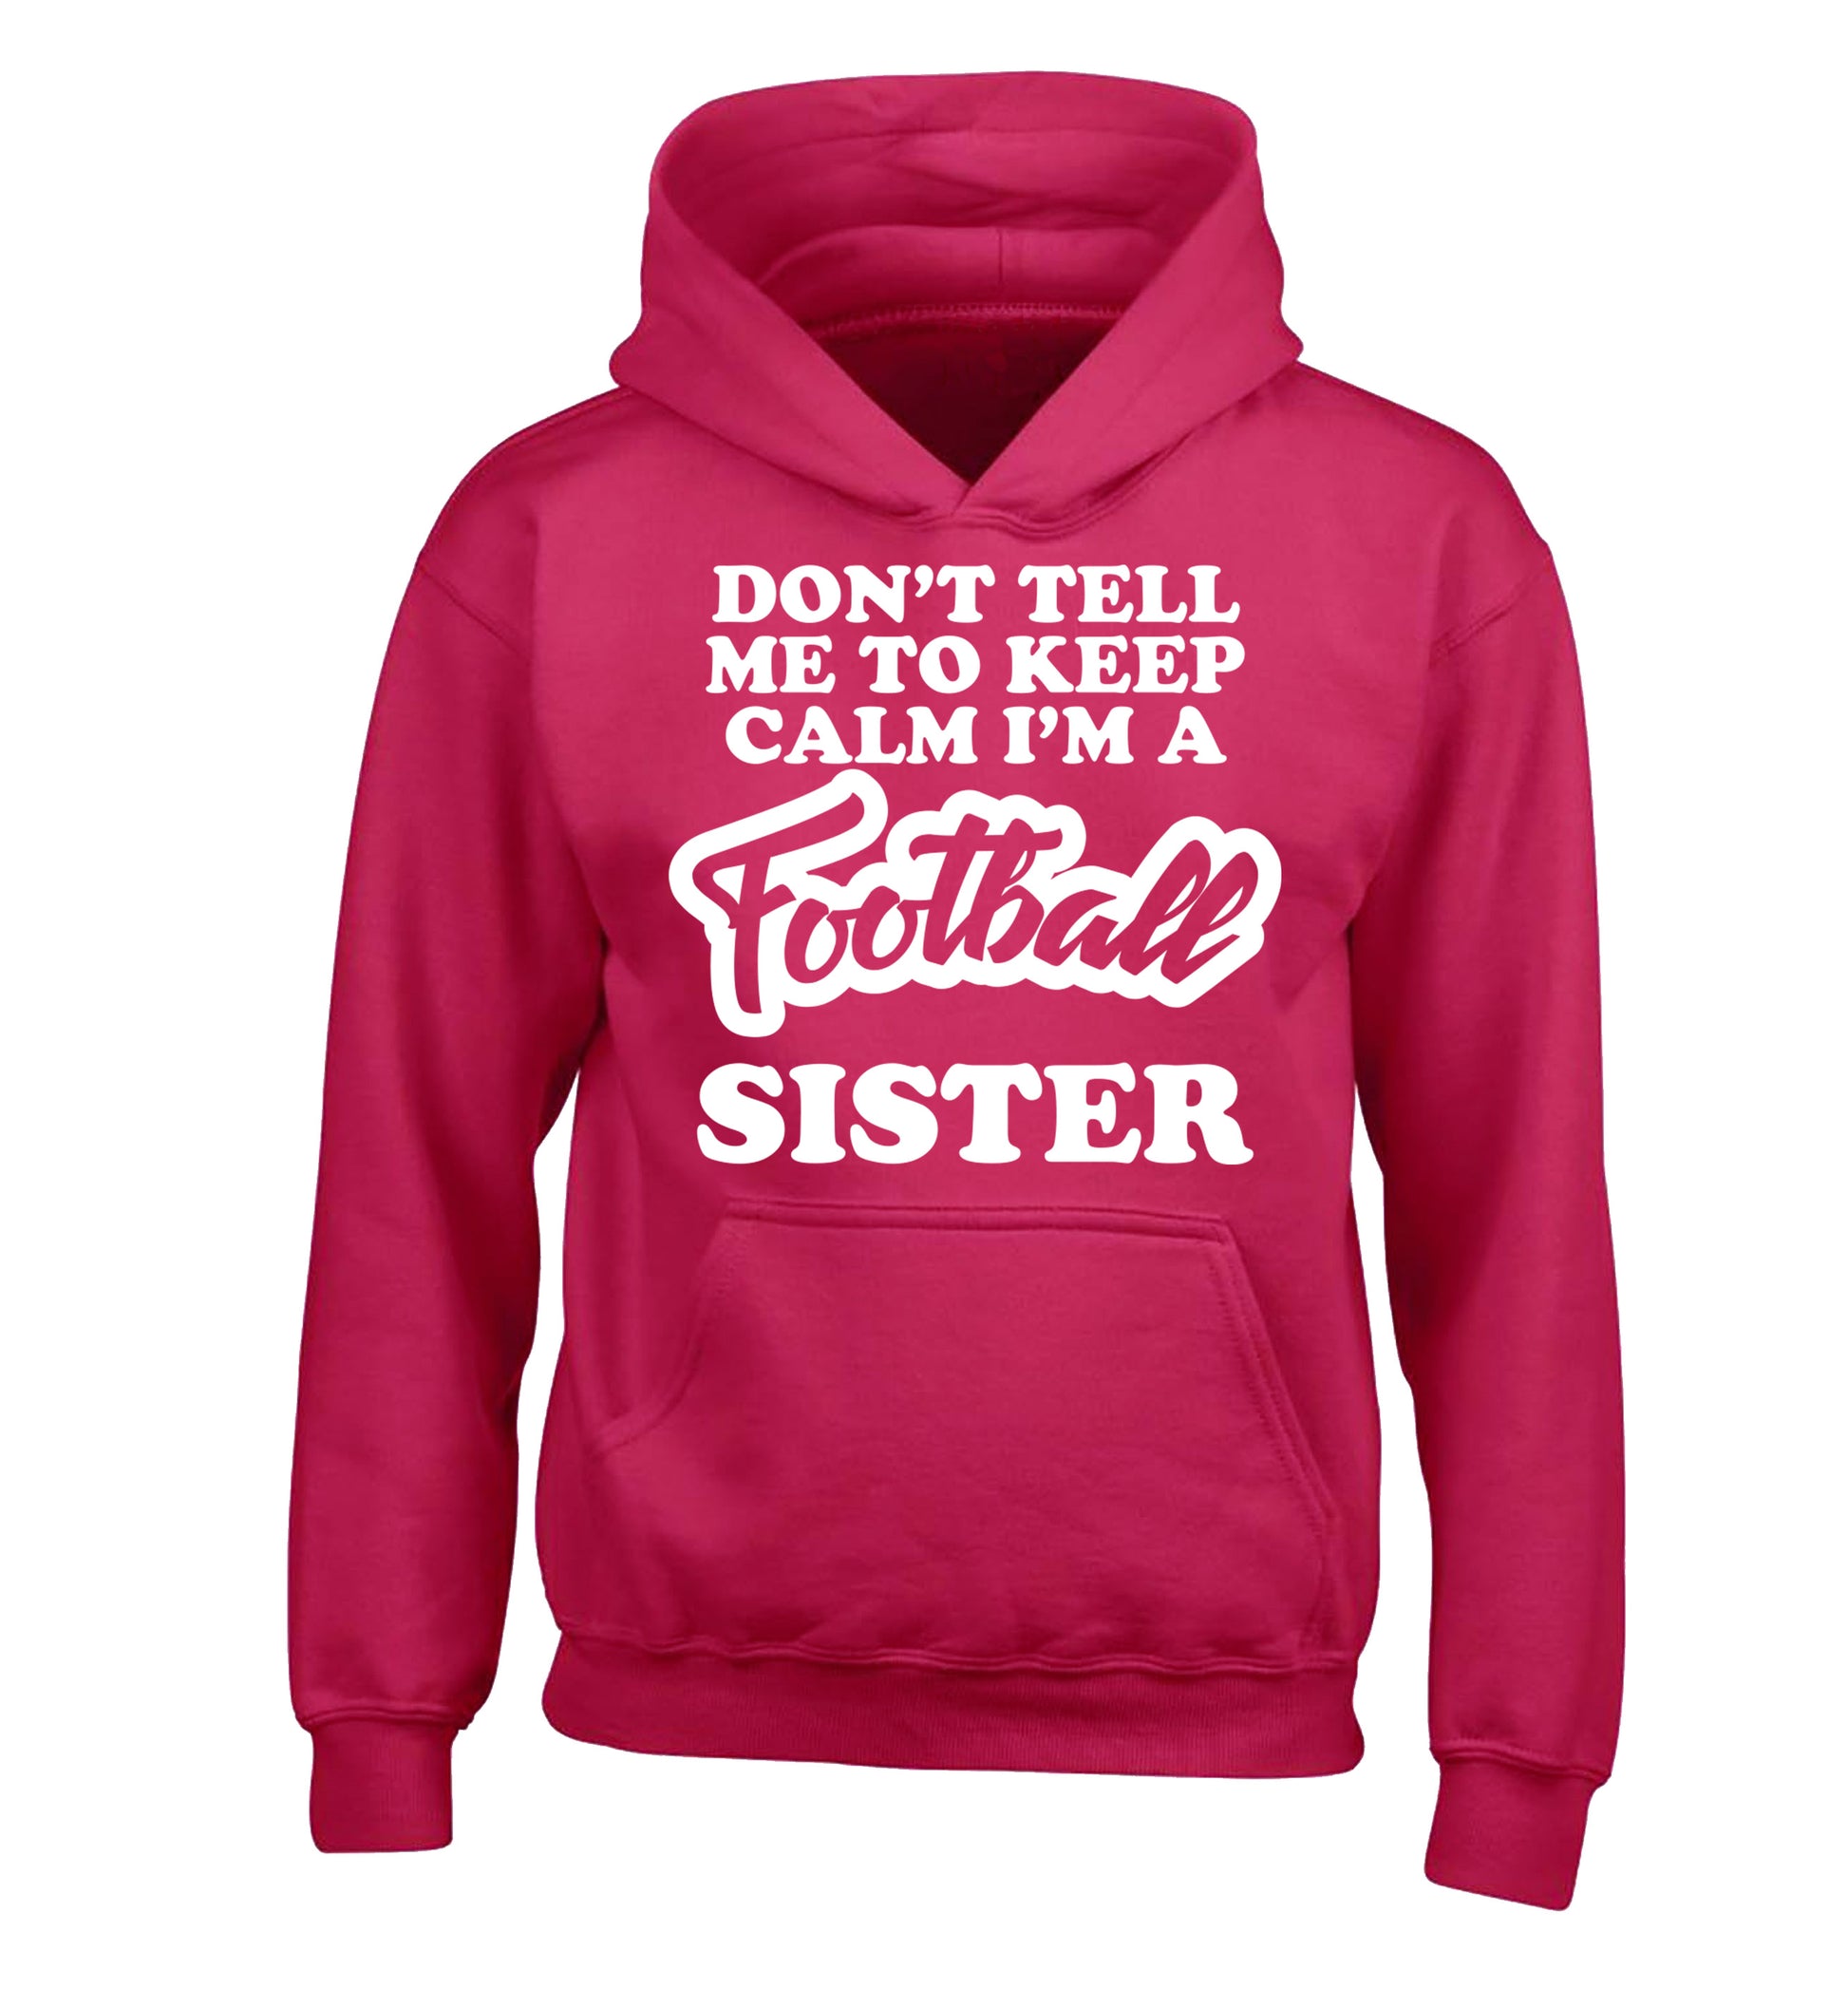 Don't tell me to keep calm I'm a football sister children's pink hoodie 12-14 Years